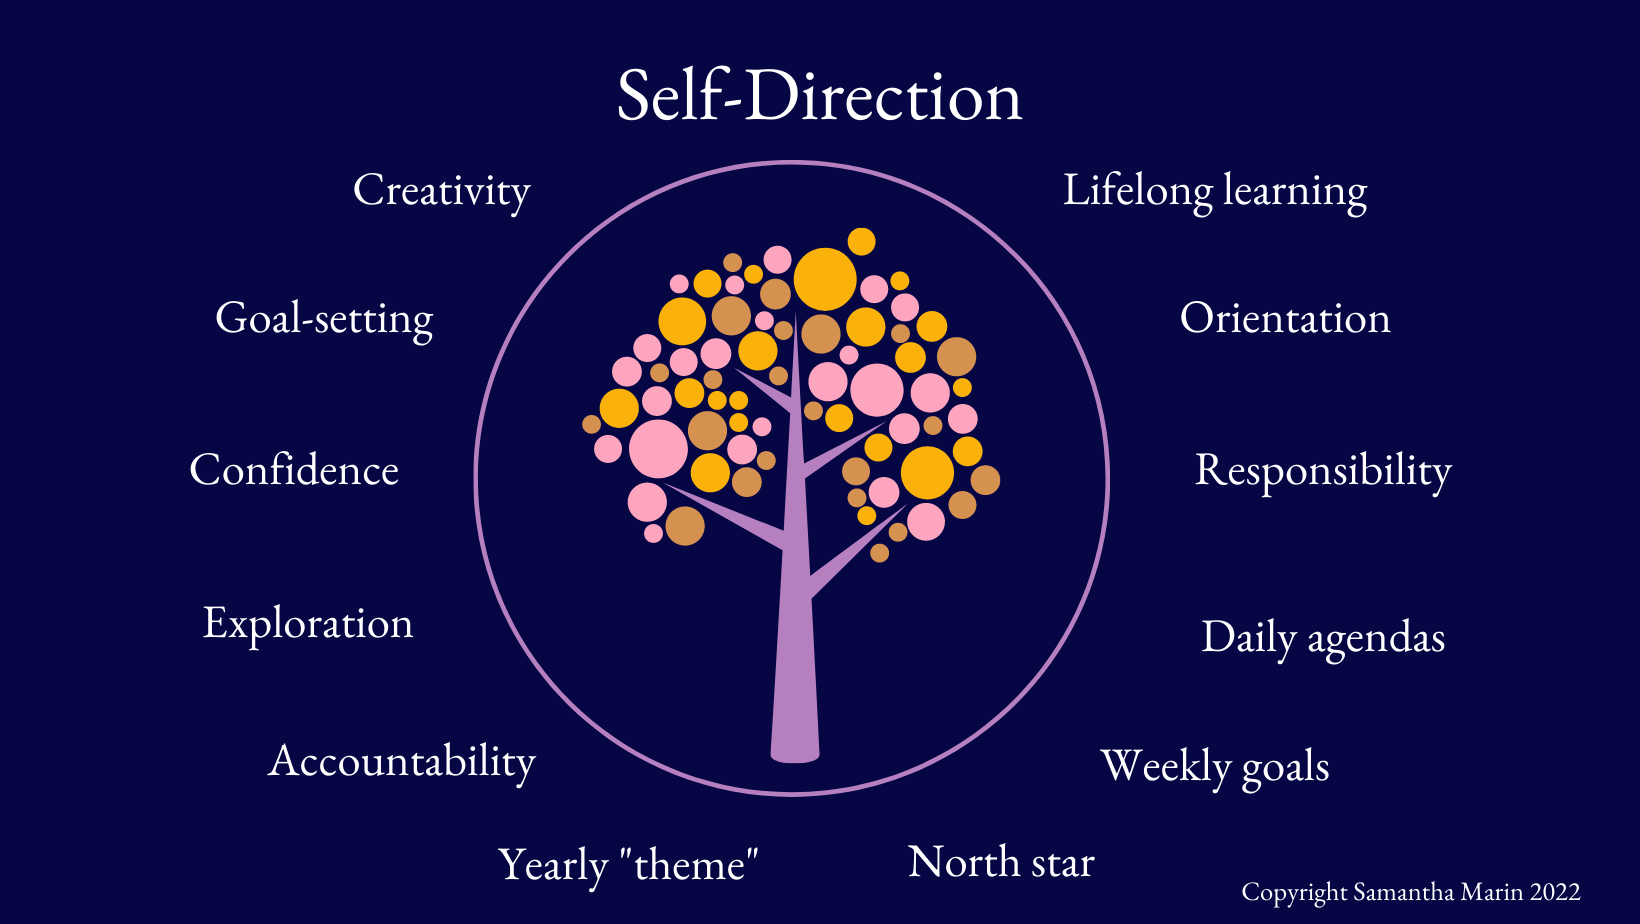 Self-direction includes small-scale, day-to-day work, as well as bigger picture ideas.